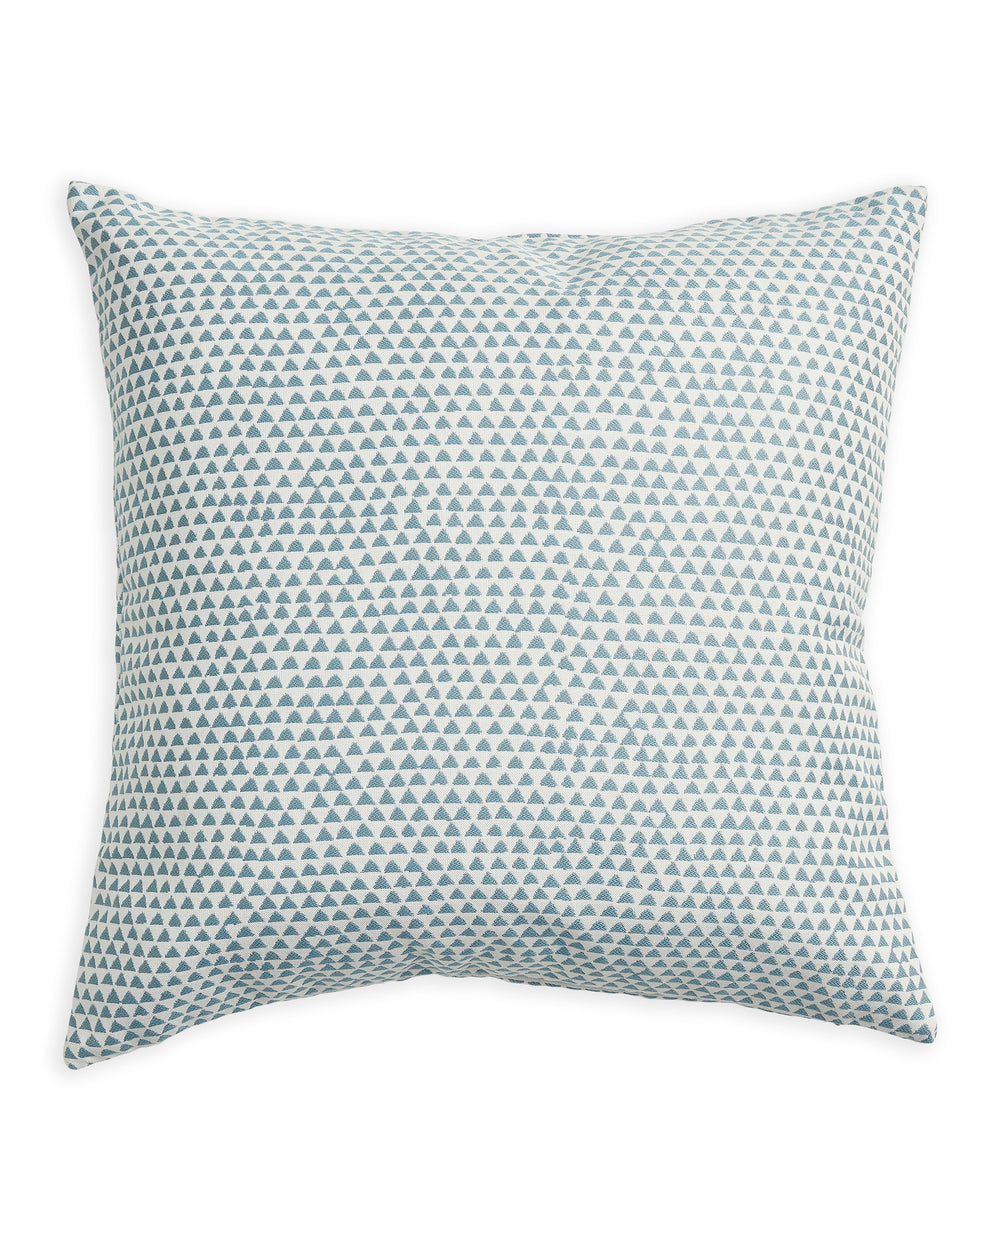 Huts Mineral Outdoor Pillow